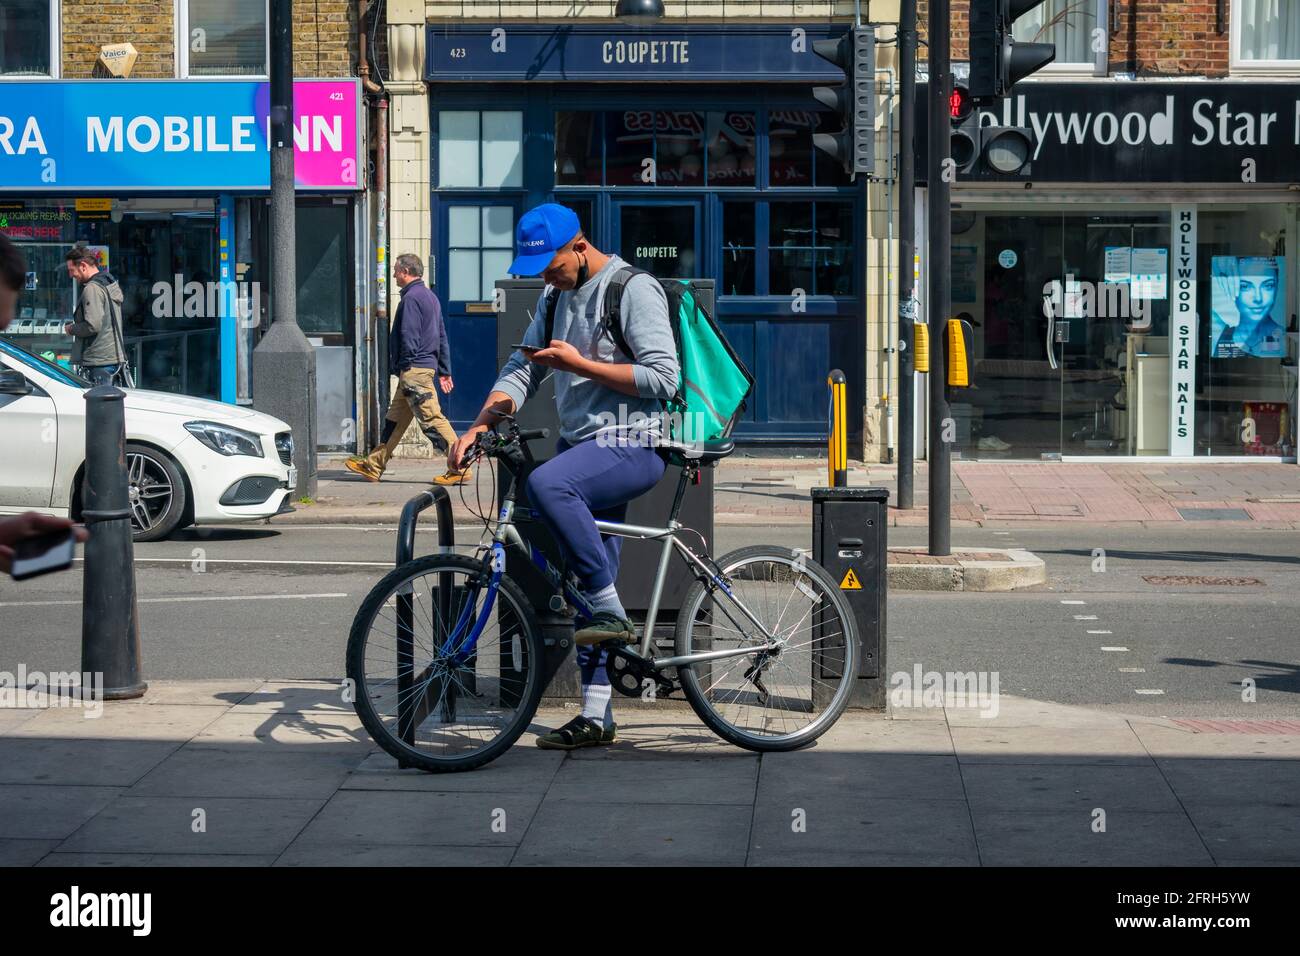 London. UK- 05.18.2021: a young man working as a self employed home delivery rider for the online food ordering company Deliveroo. Stock Photo